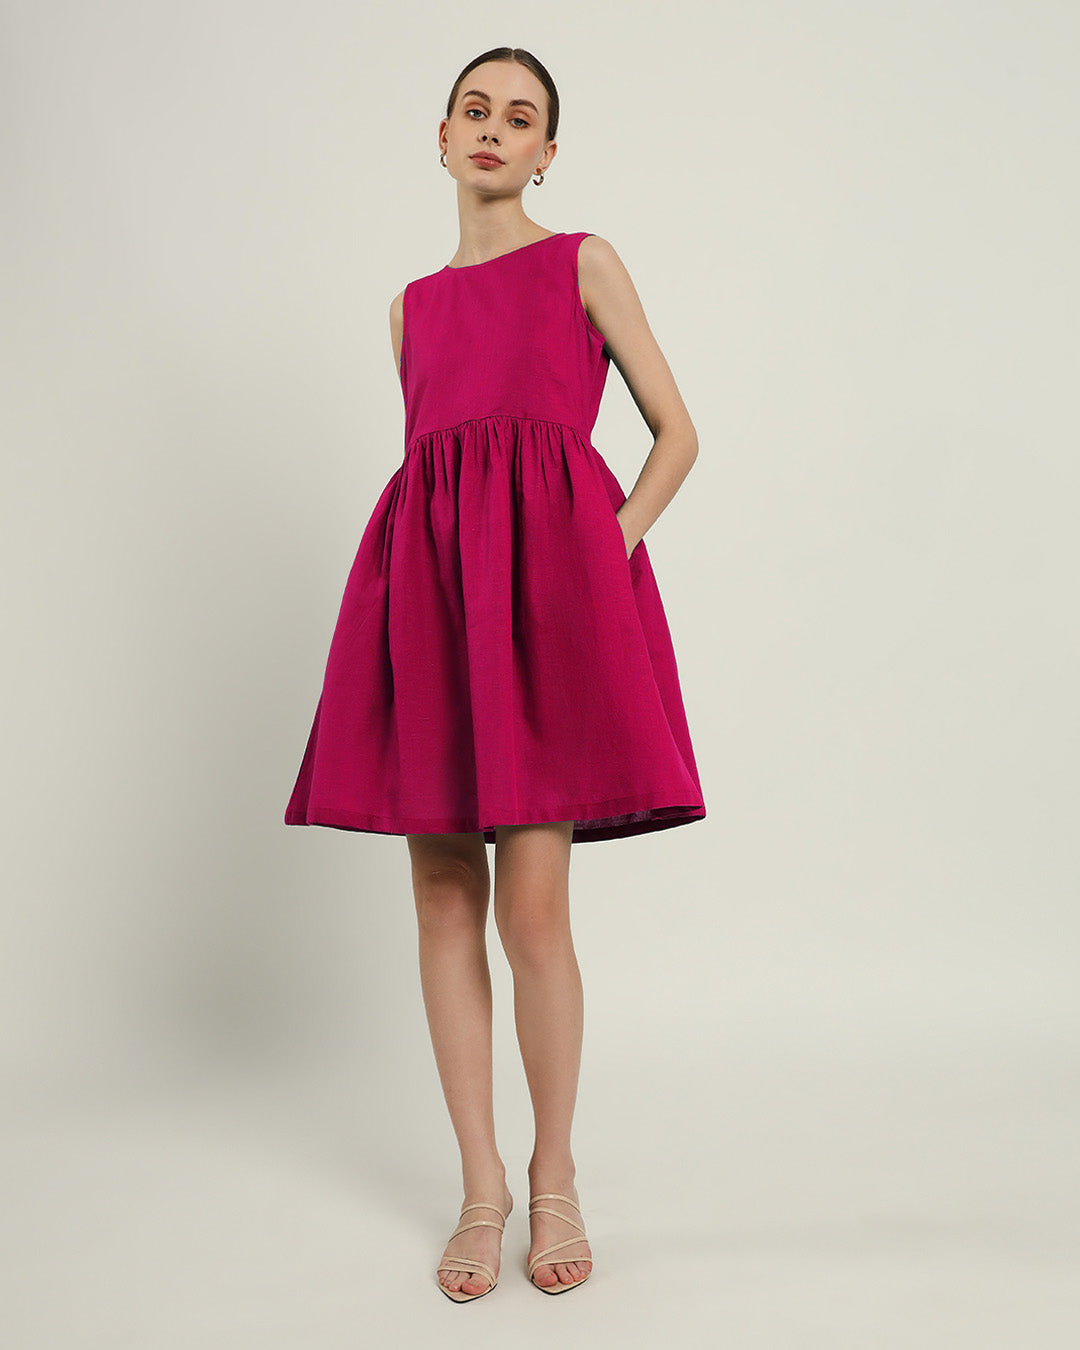 The Chania Berry Dress